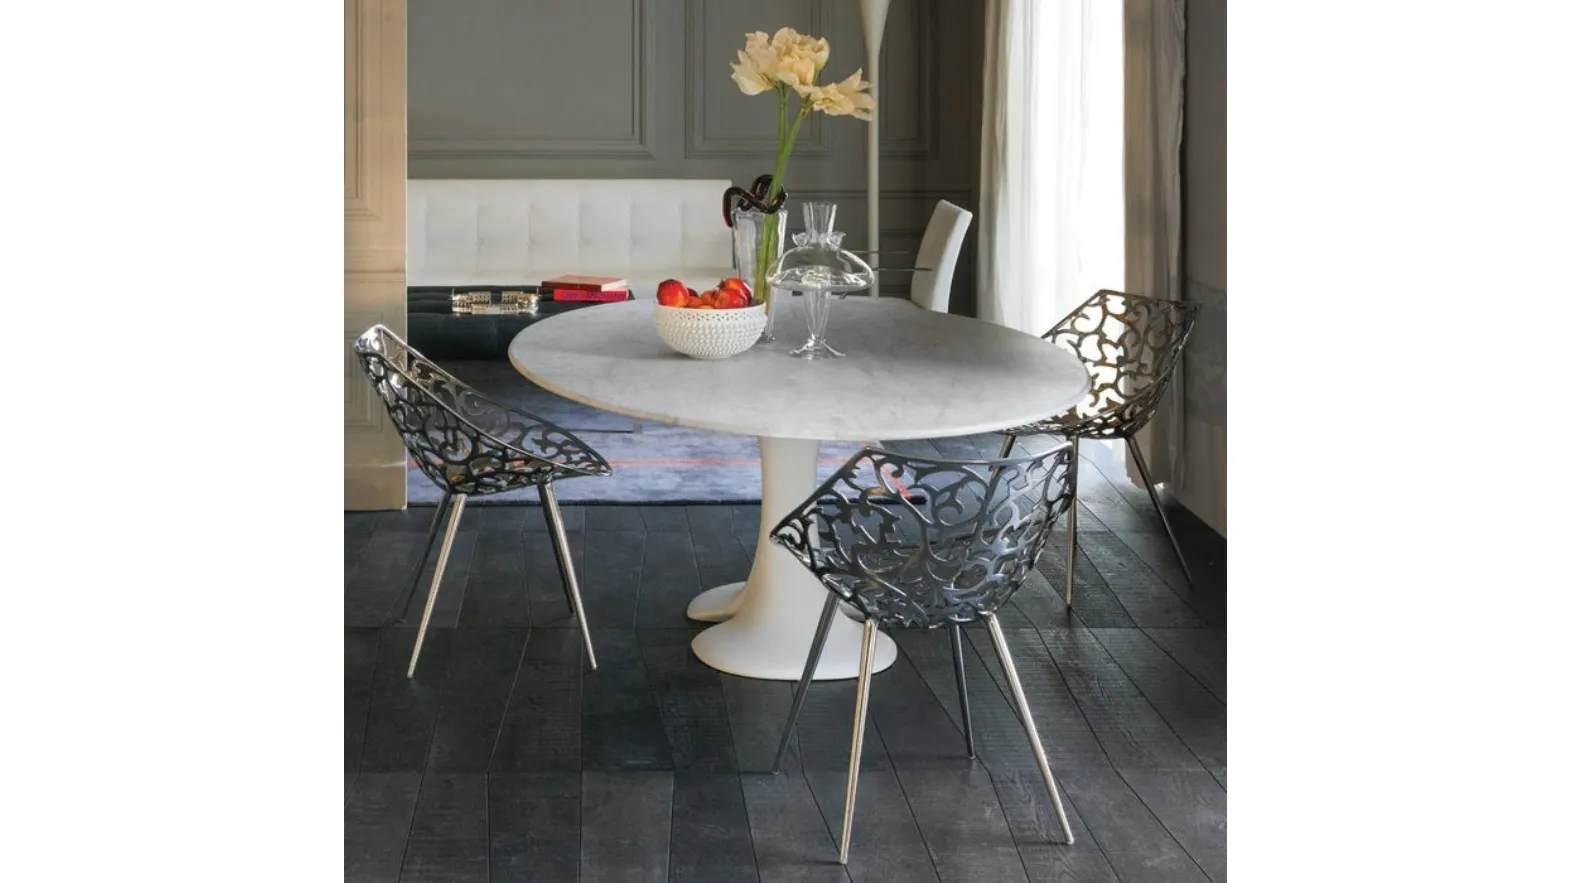 Miss Lacy chair in stainless steel by Driade.